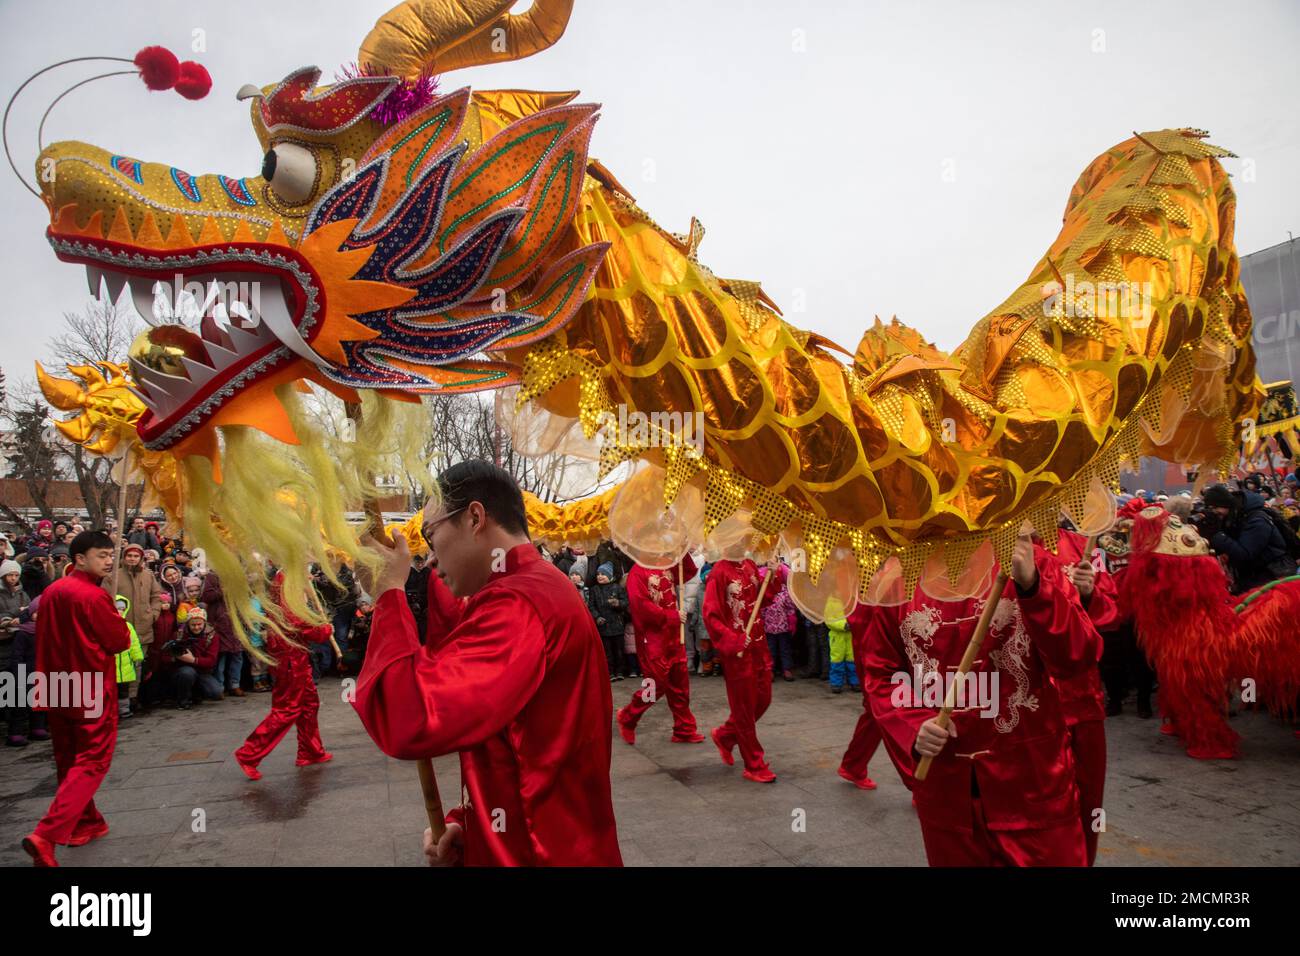 Moscow, Russia. 21st of January, 2023. Artists perform a dragon dance during the Chinese Lunar New Year celebration at the Exhibition of Achievements of National Economy (VDNH) in Moscow, Russia. Nikolay Vinokurov/Alamy Live News Stock Photo